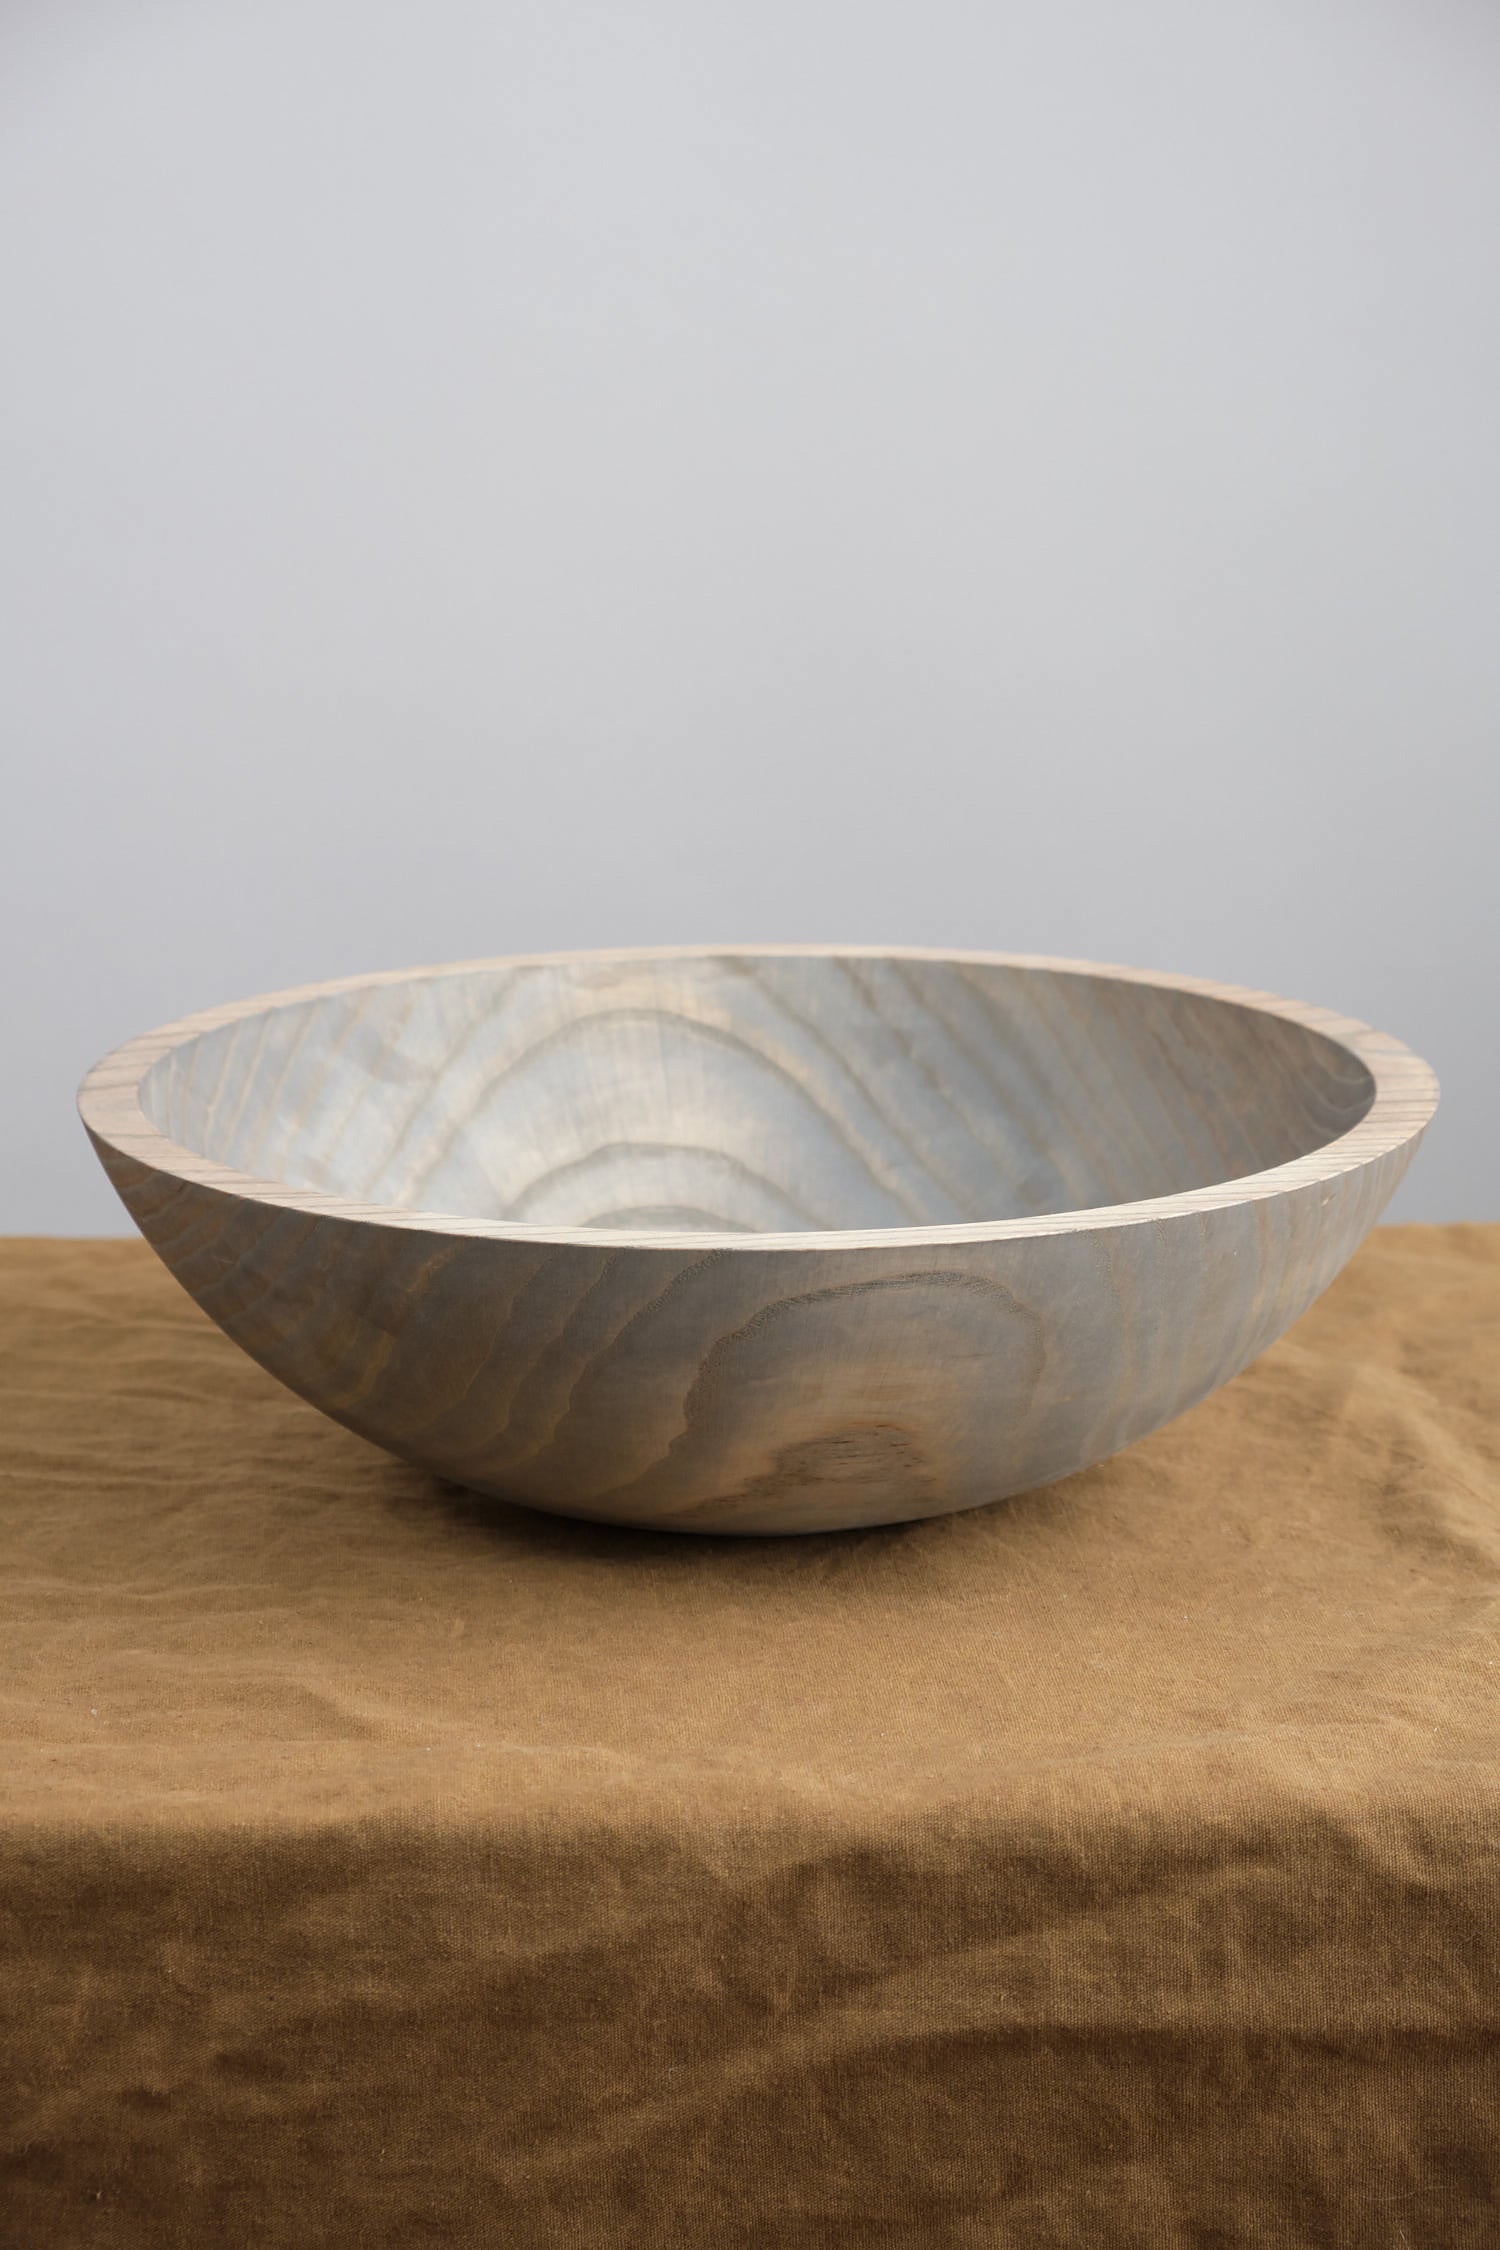 15" Crafted Wooden Bowl in Grey